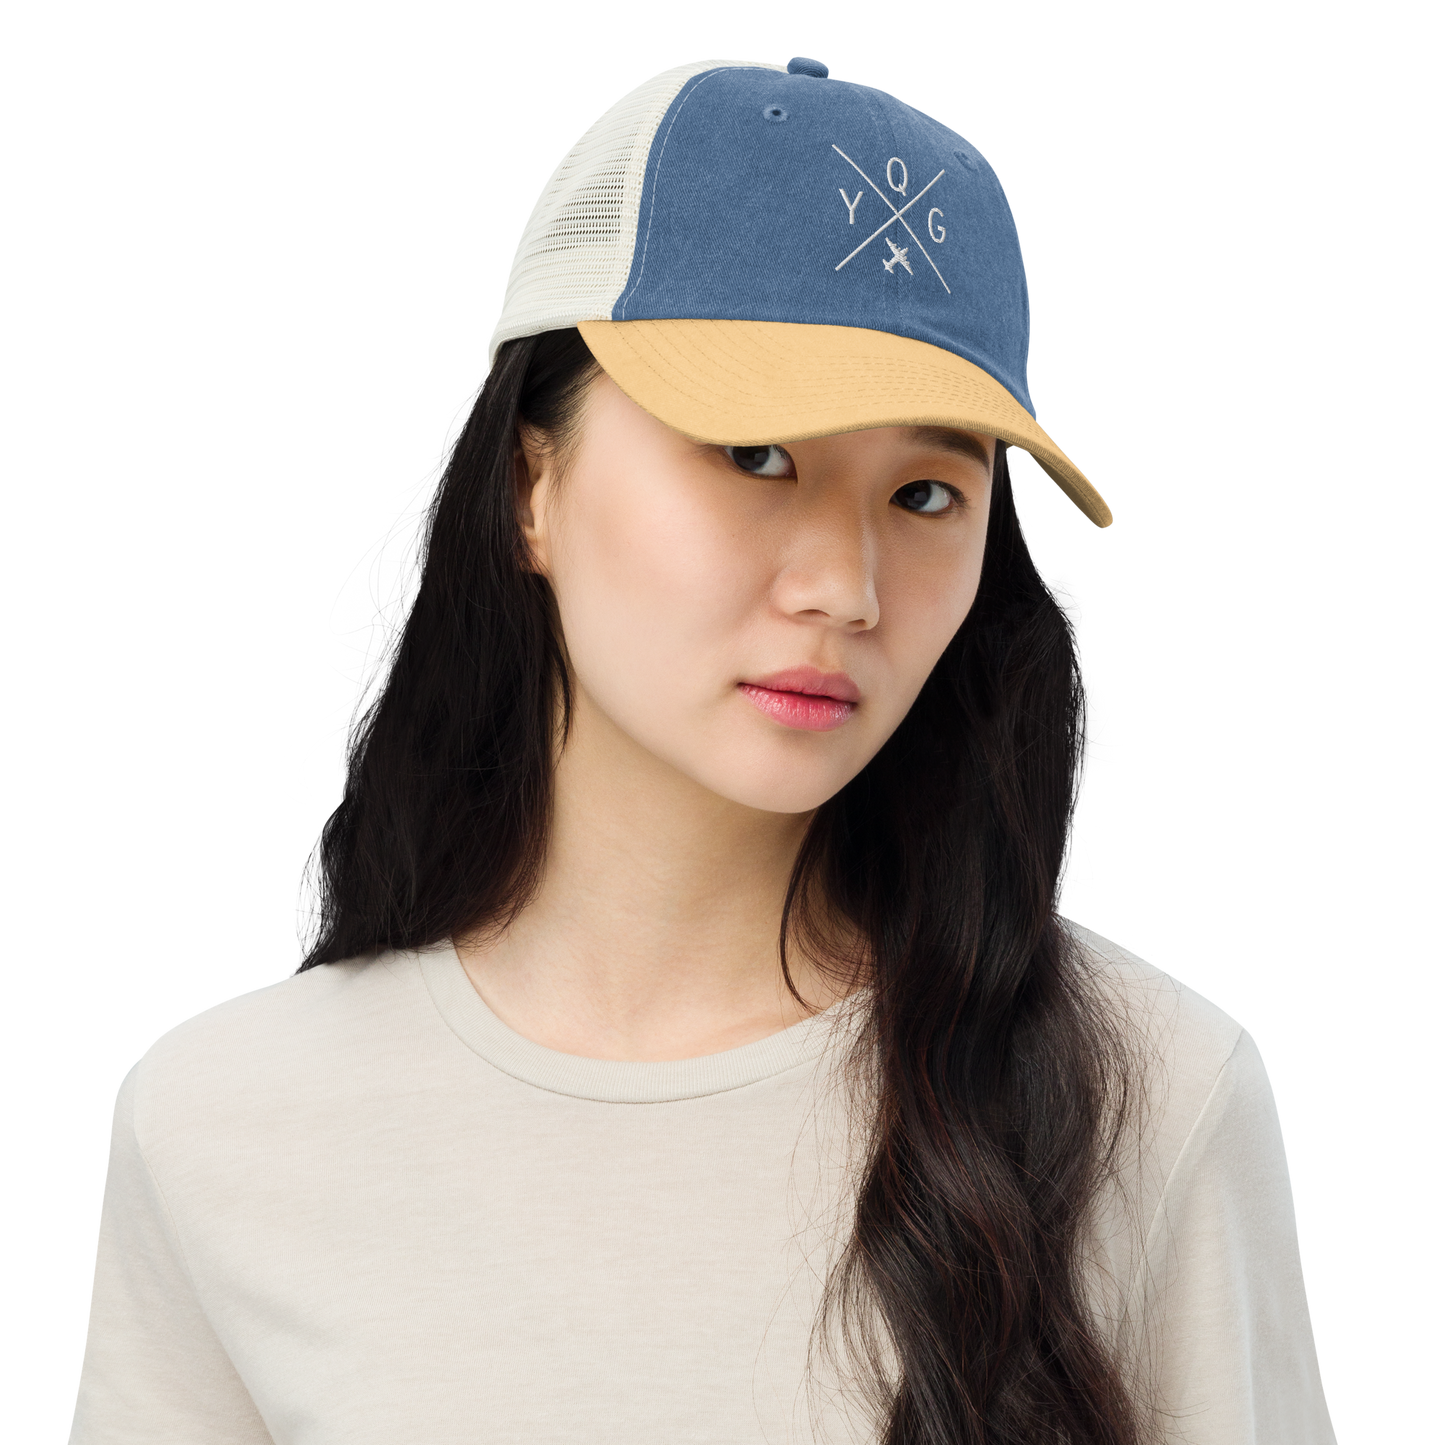 YHM Designs - YQG Windsor Pigment-Dyed Trucker Cap - Crossed-X Design with Airport Code and Vintage Propliner - White Embroidery - Image 03